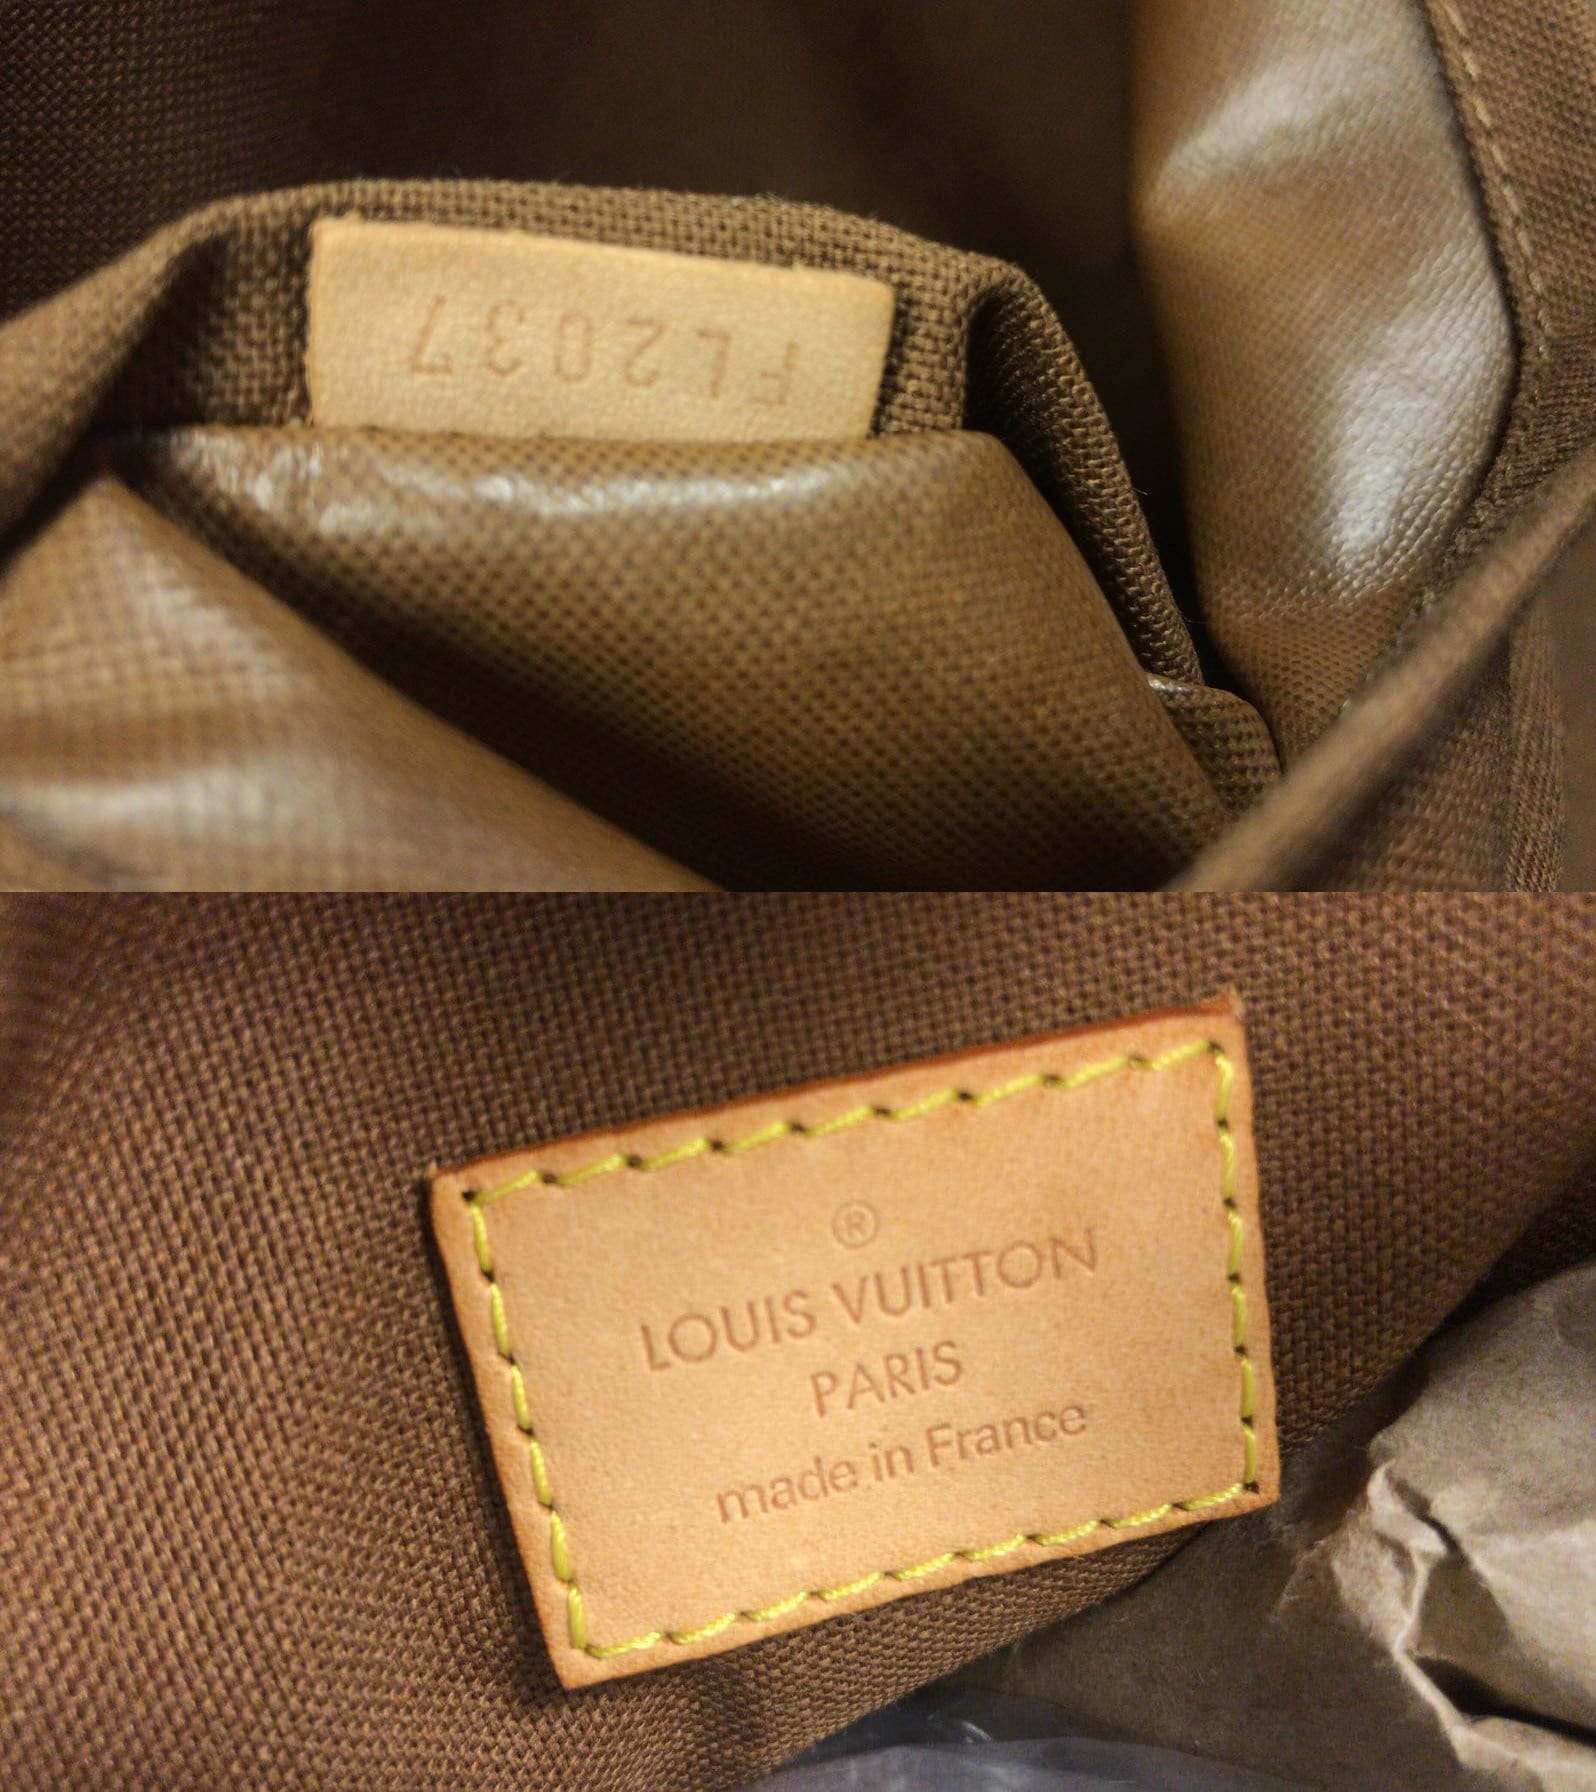 Louis Vuitton Monogram Eole 50 Rolling Luggage Convertible Duffle Bag  1019lv29 at 1stDibs